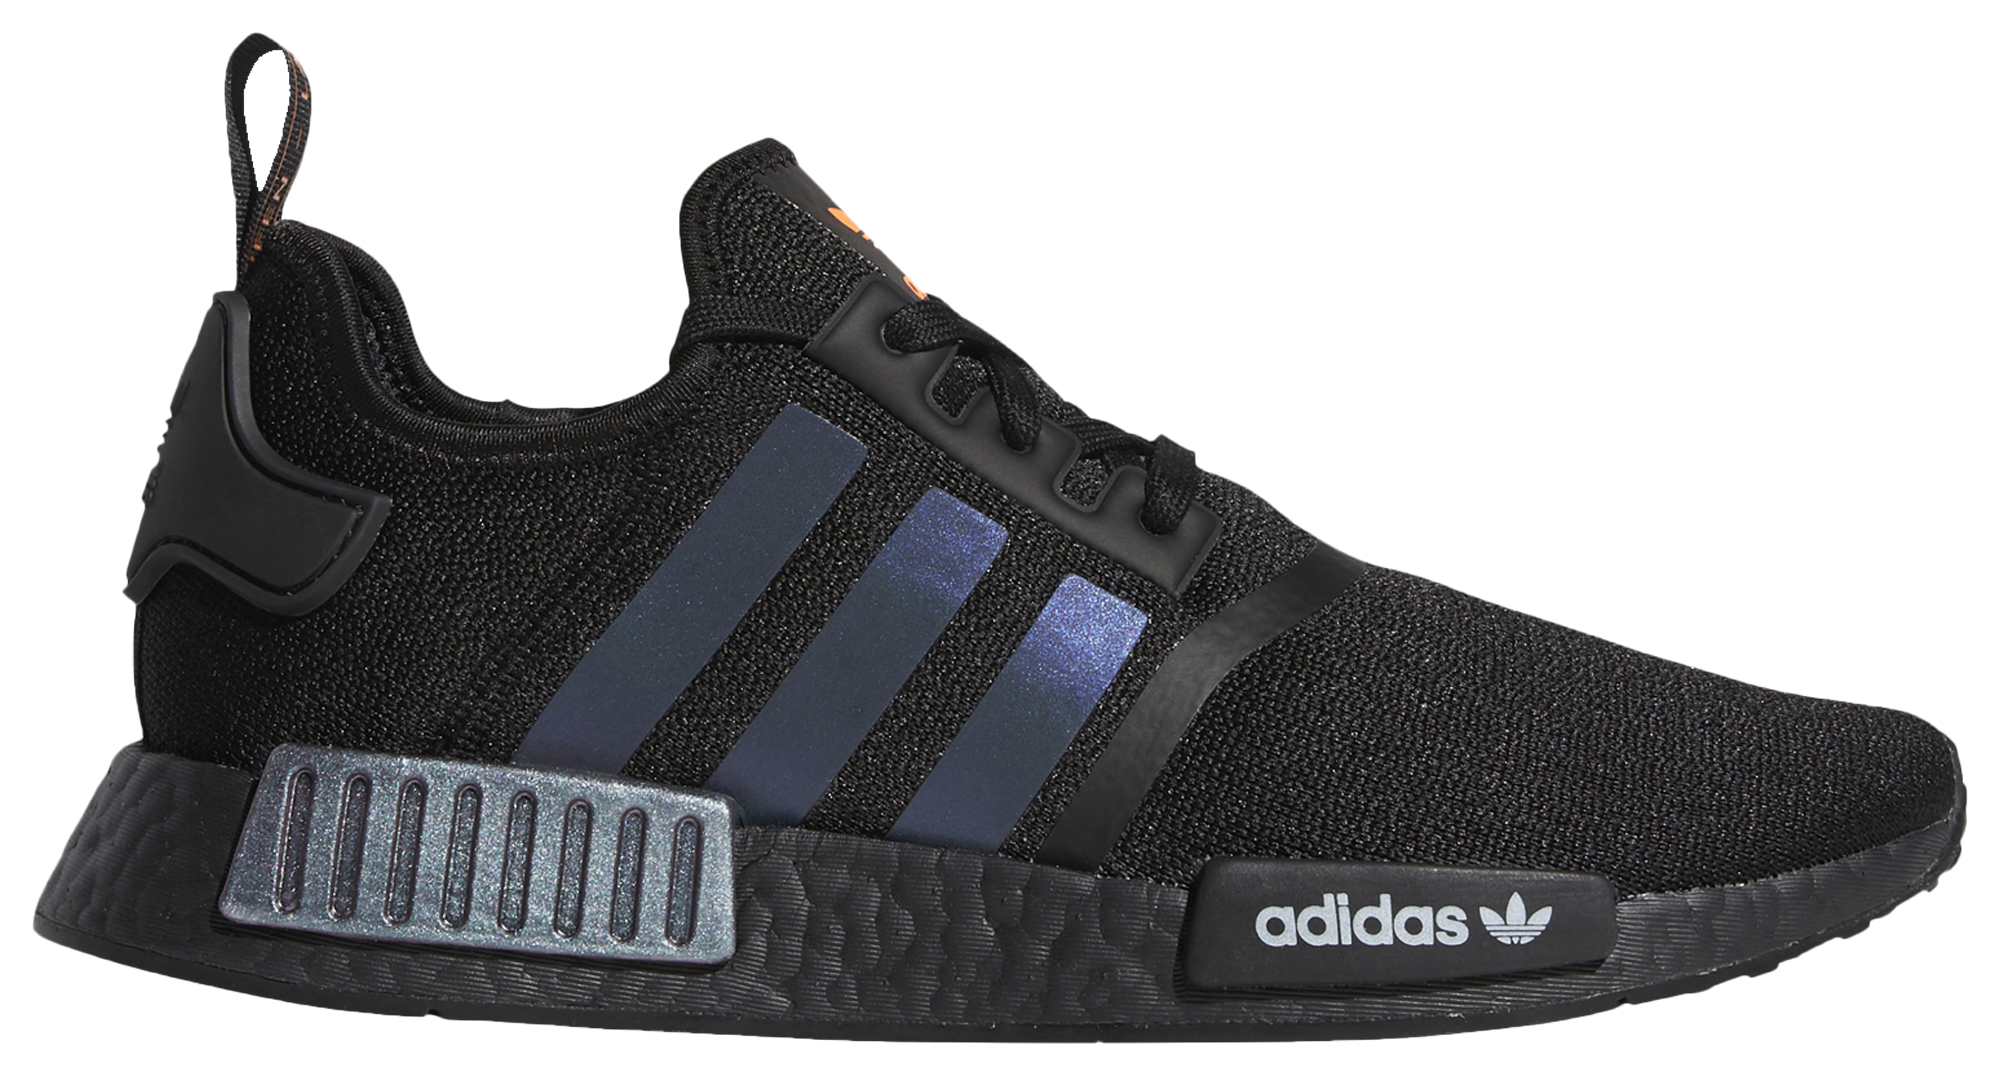 Adidas NMD R1 Wide Ripstop Pack On Feet Sneaker Review